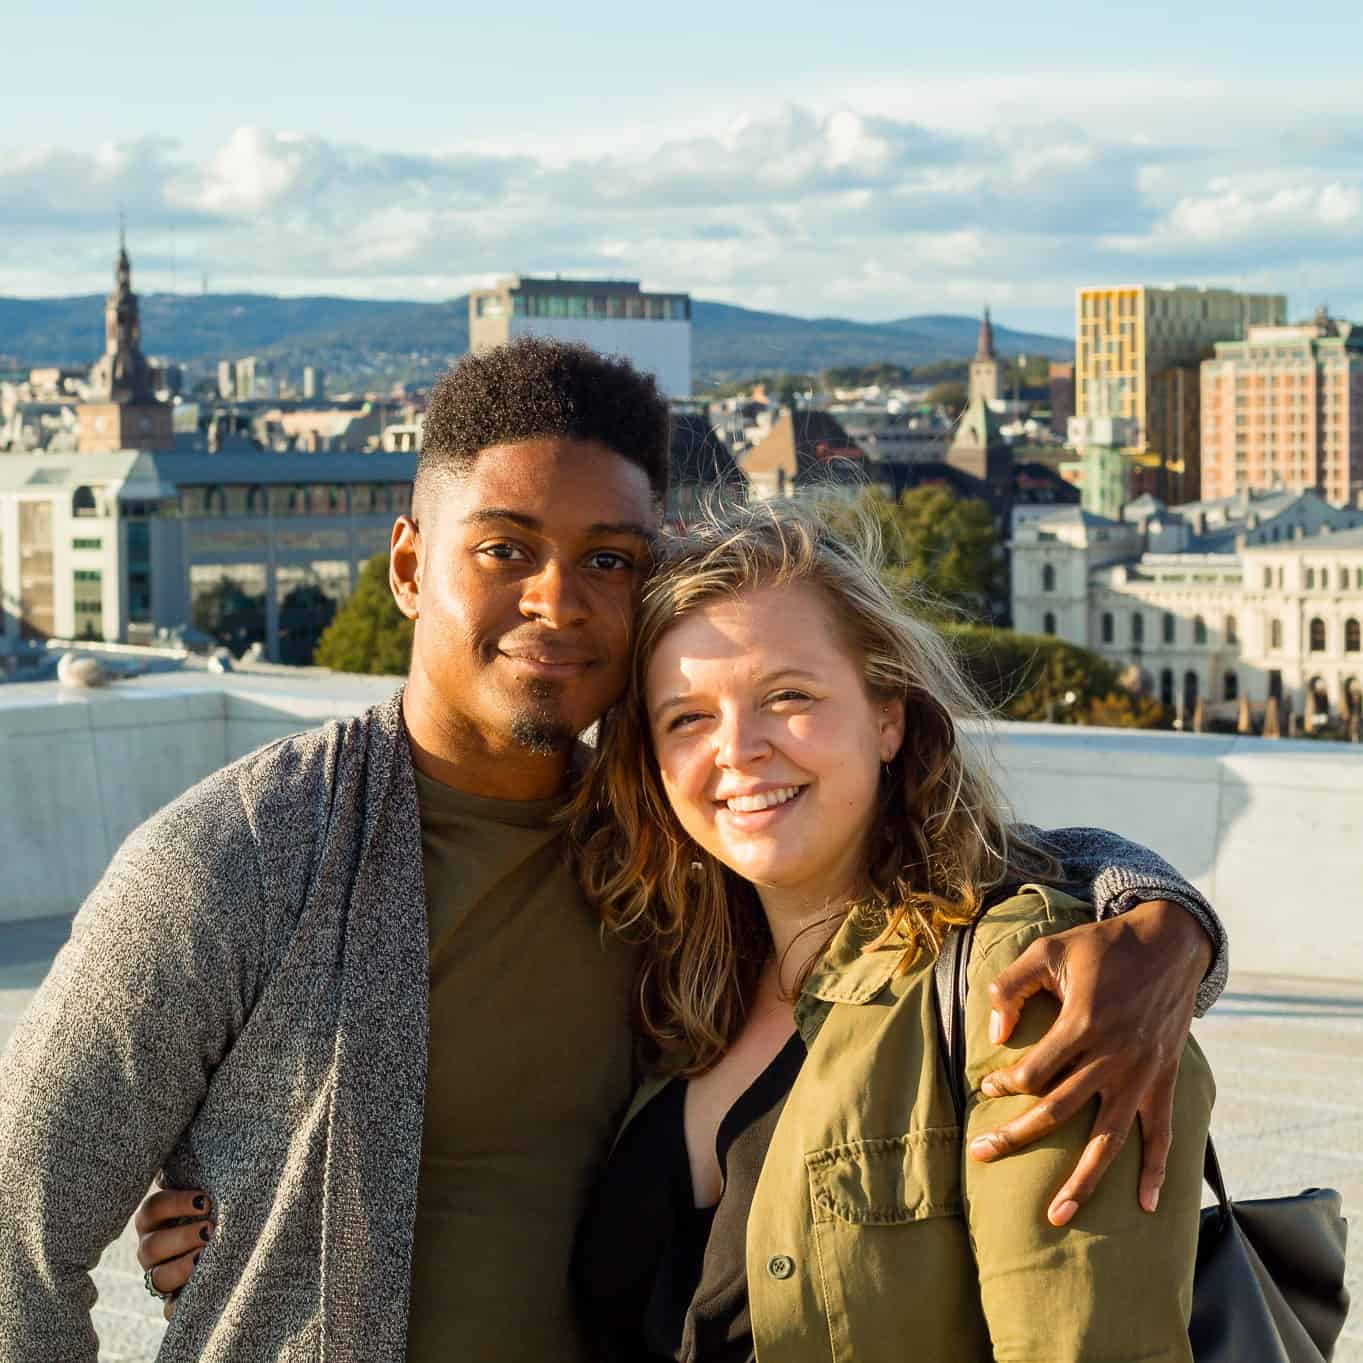 Briana and Chamere in Norway Opera House